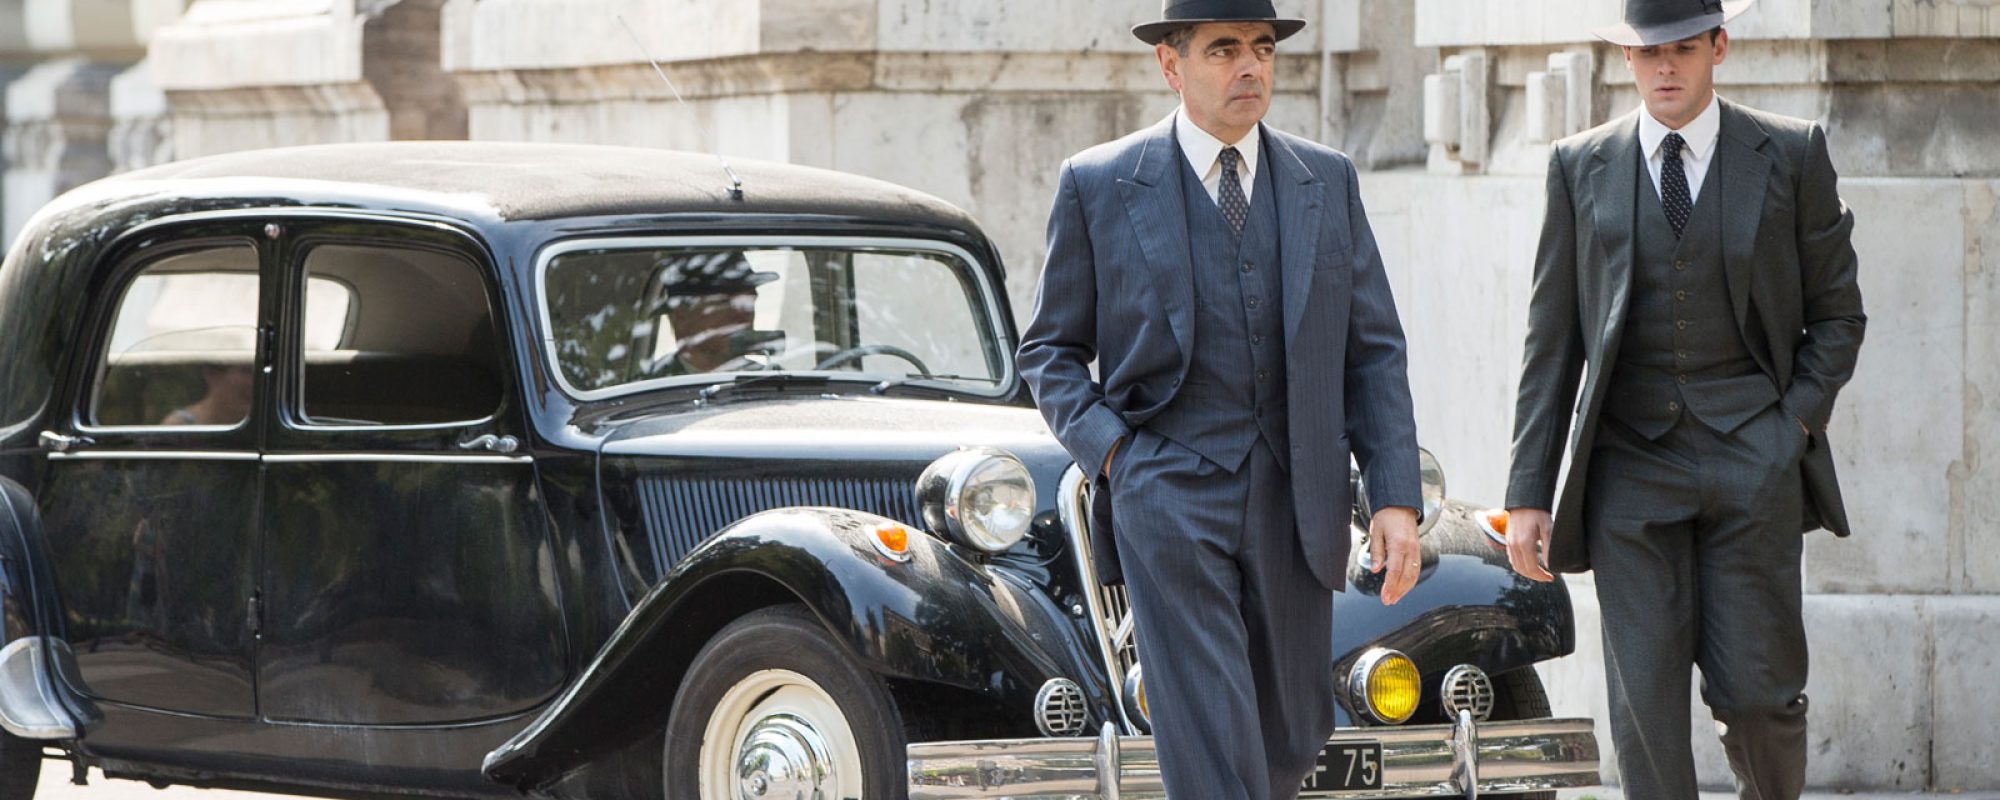 FOLLOWING THE SUCCESS OF VERSAILLES AND RIVIERA, OVATION RETURNS TO FRANCE WITH MAIGRET